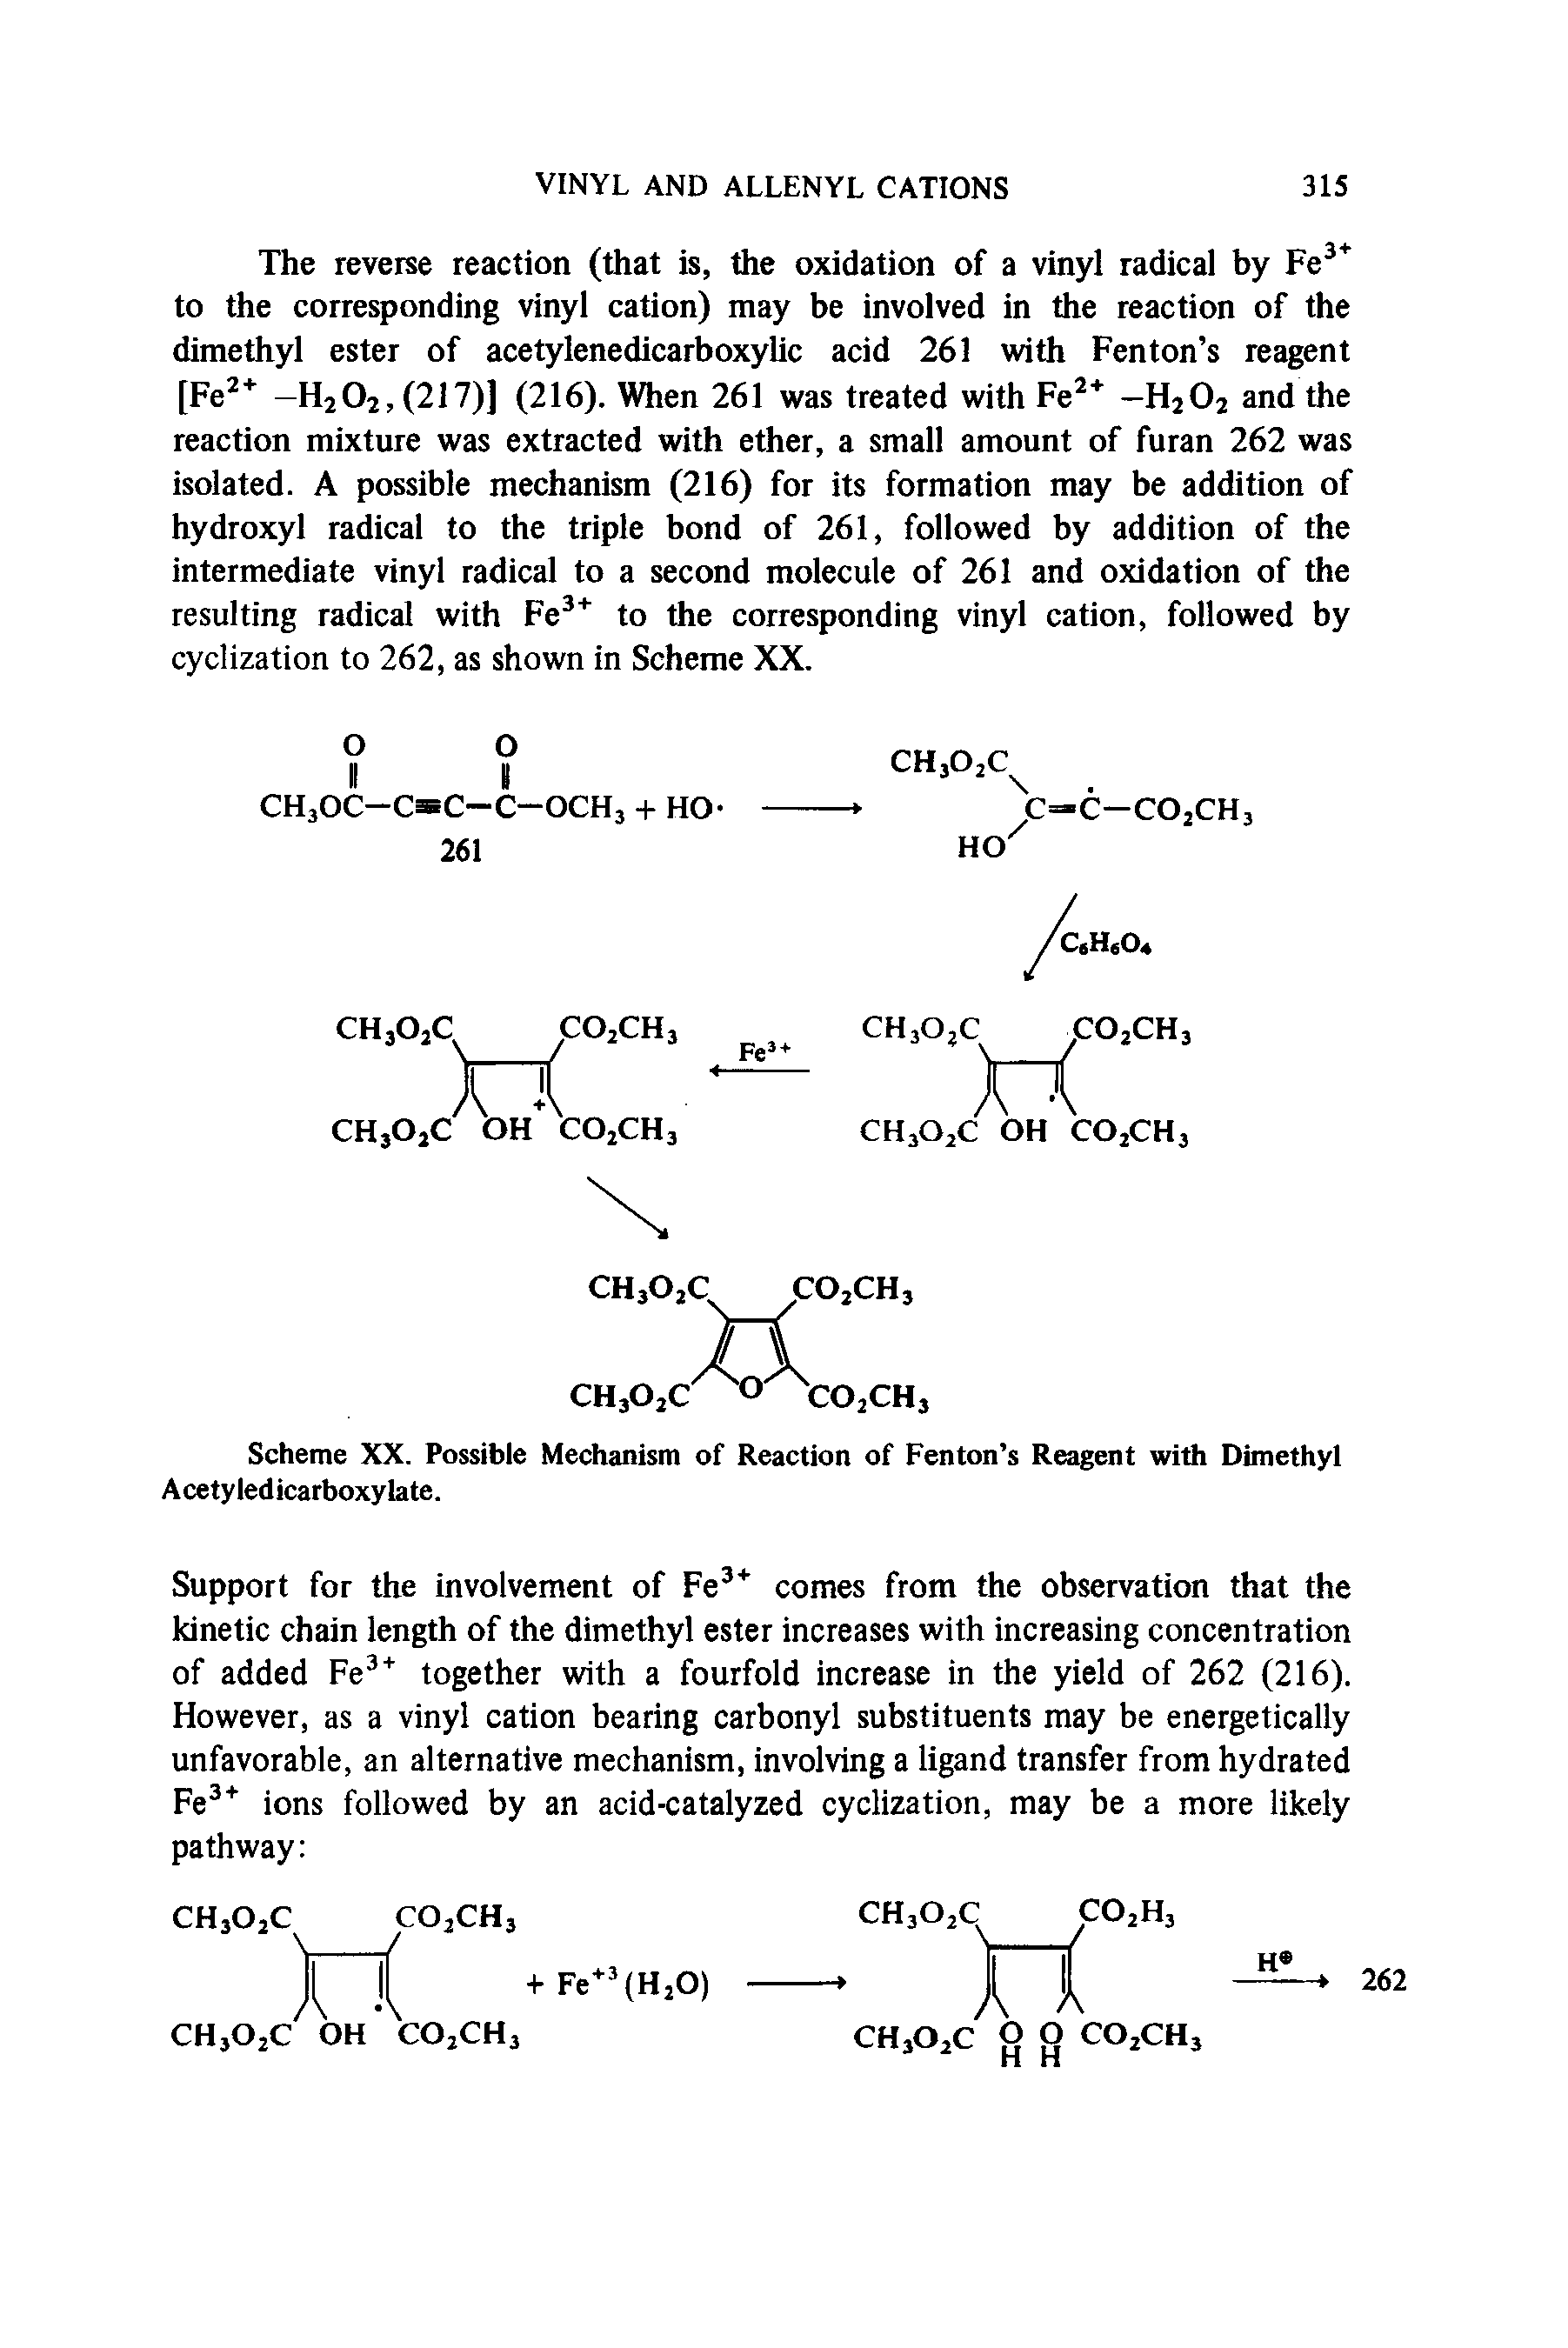 Scheme XX. Possible Mechanism of Reaction of Fenton s Reagent with Dimethyl Acetyledicarboxylate.